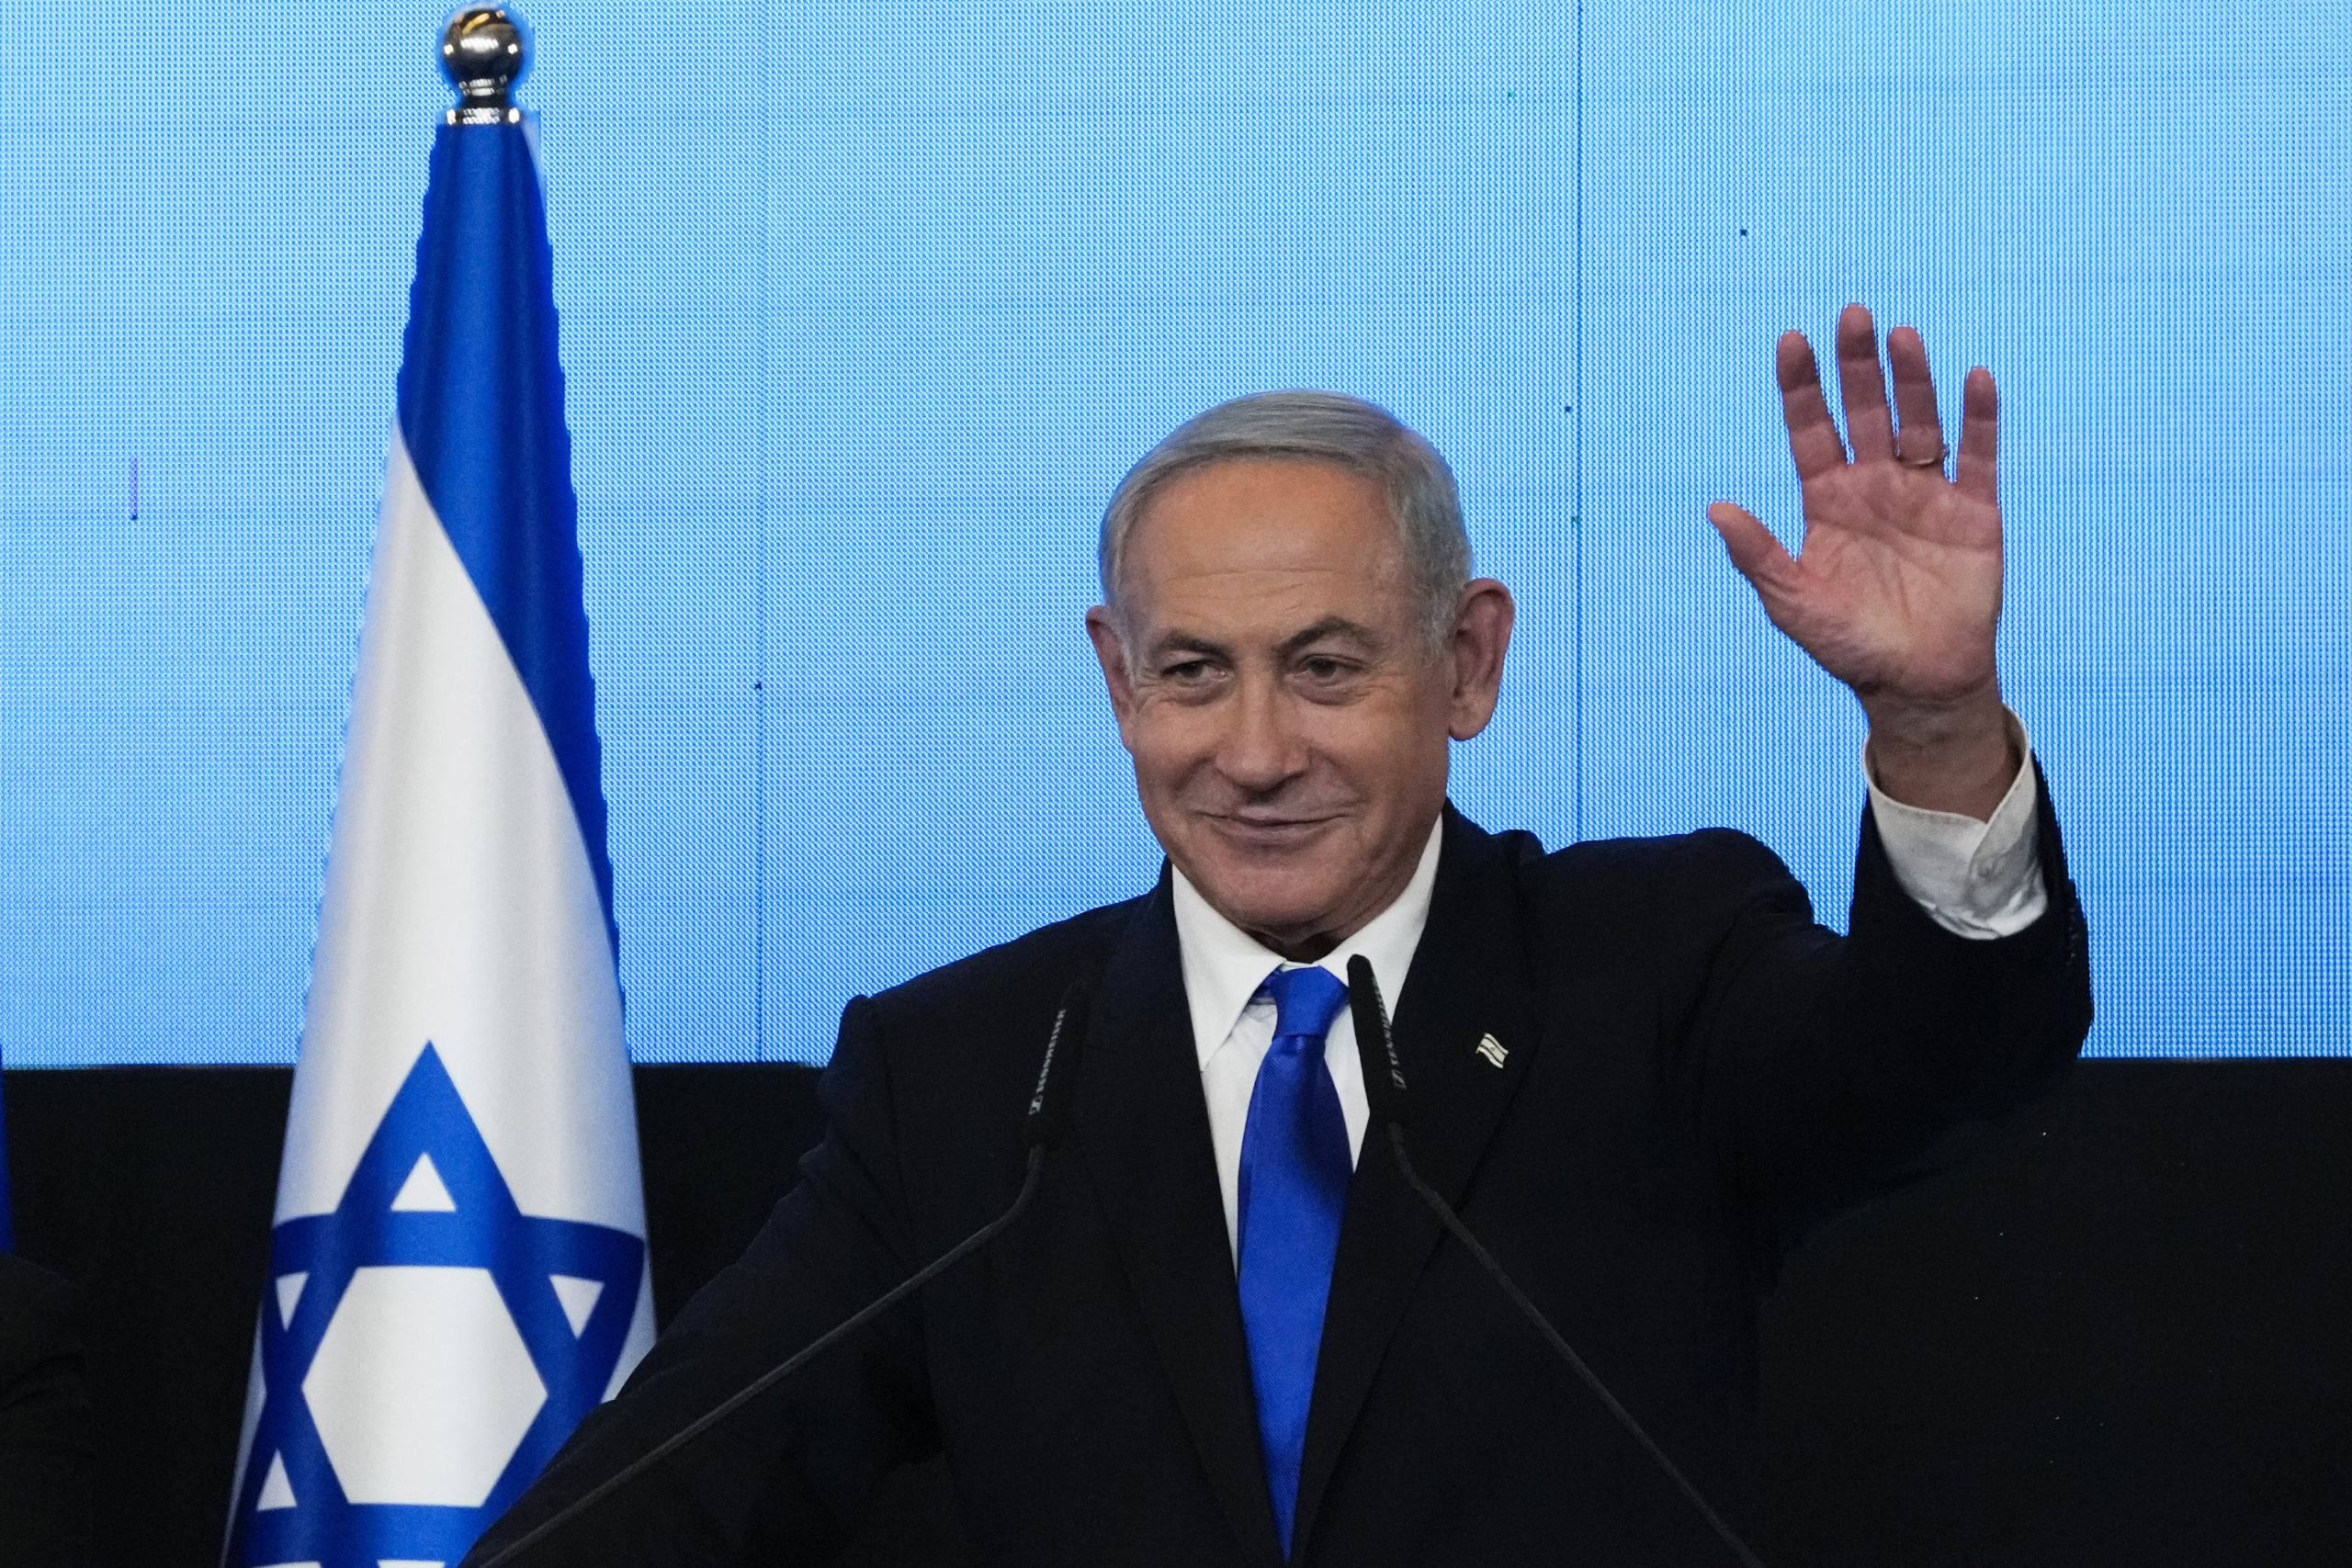 Benjamin Netanyahu, former Israeli Prime Minister and the head of Likud party, waves to his supporters after first exit poll results for the Israeli Parliamentary election at his party's headquarters in Jerusalem on Nov. 2.